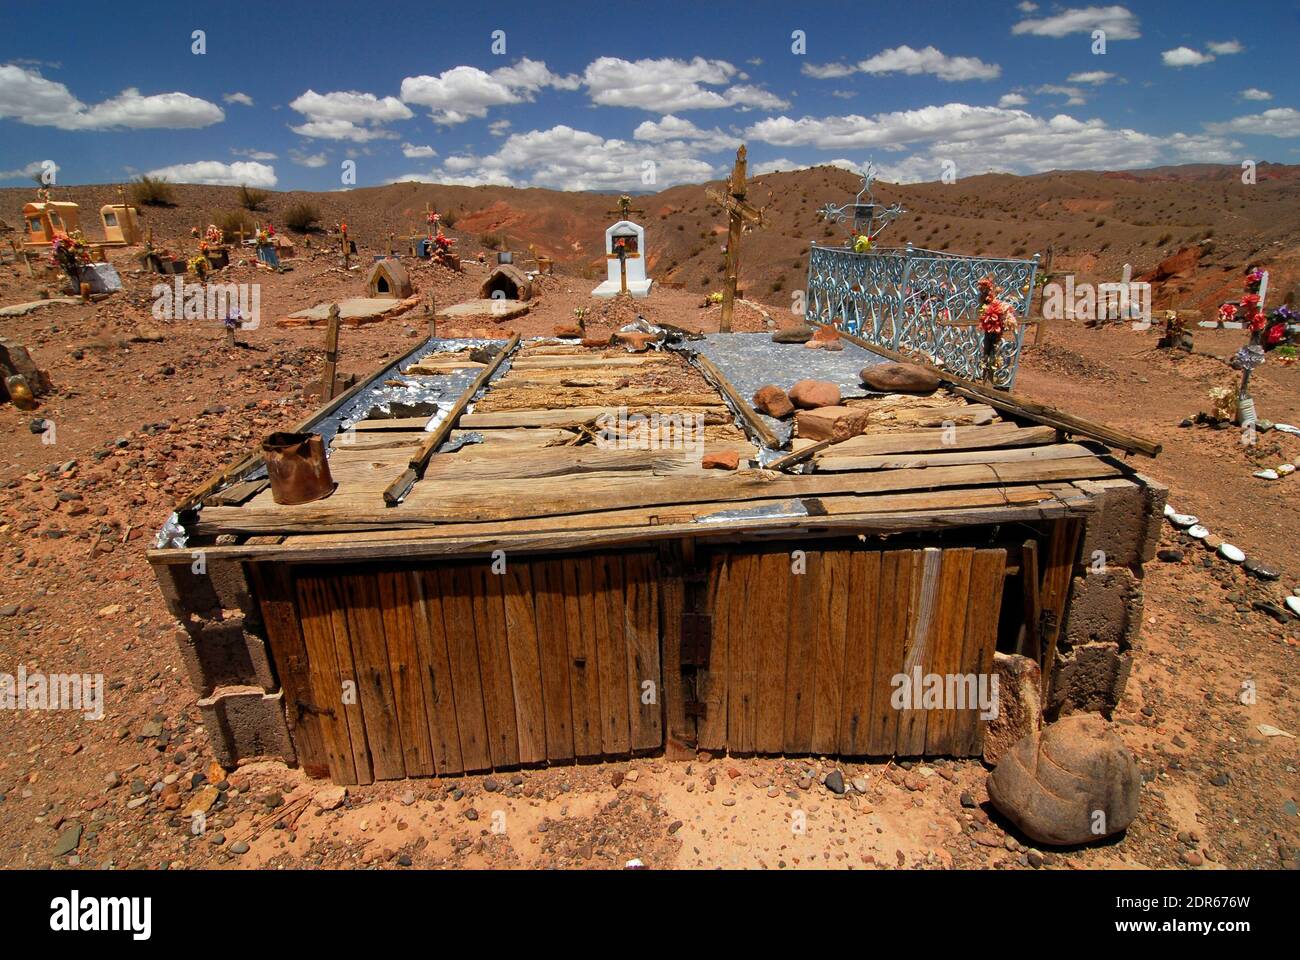 a cemetery or a graveyard in the Andes of Argentina Stock Photo